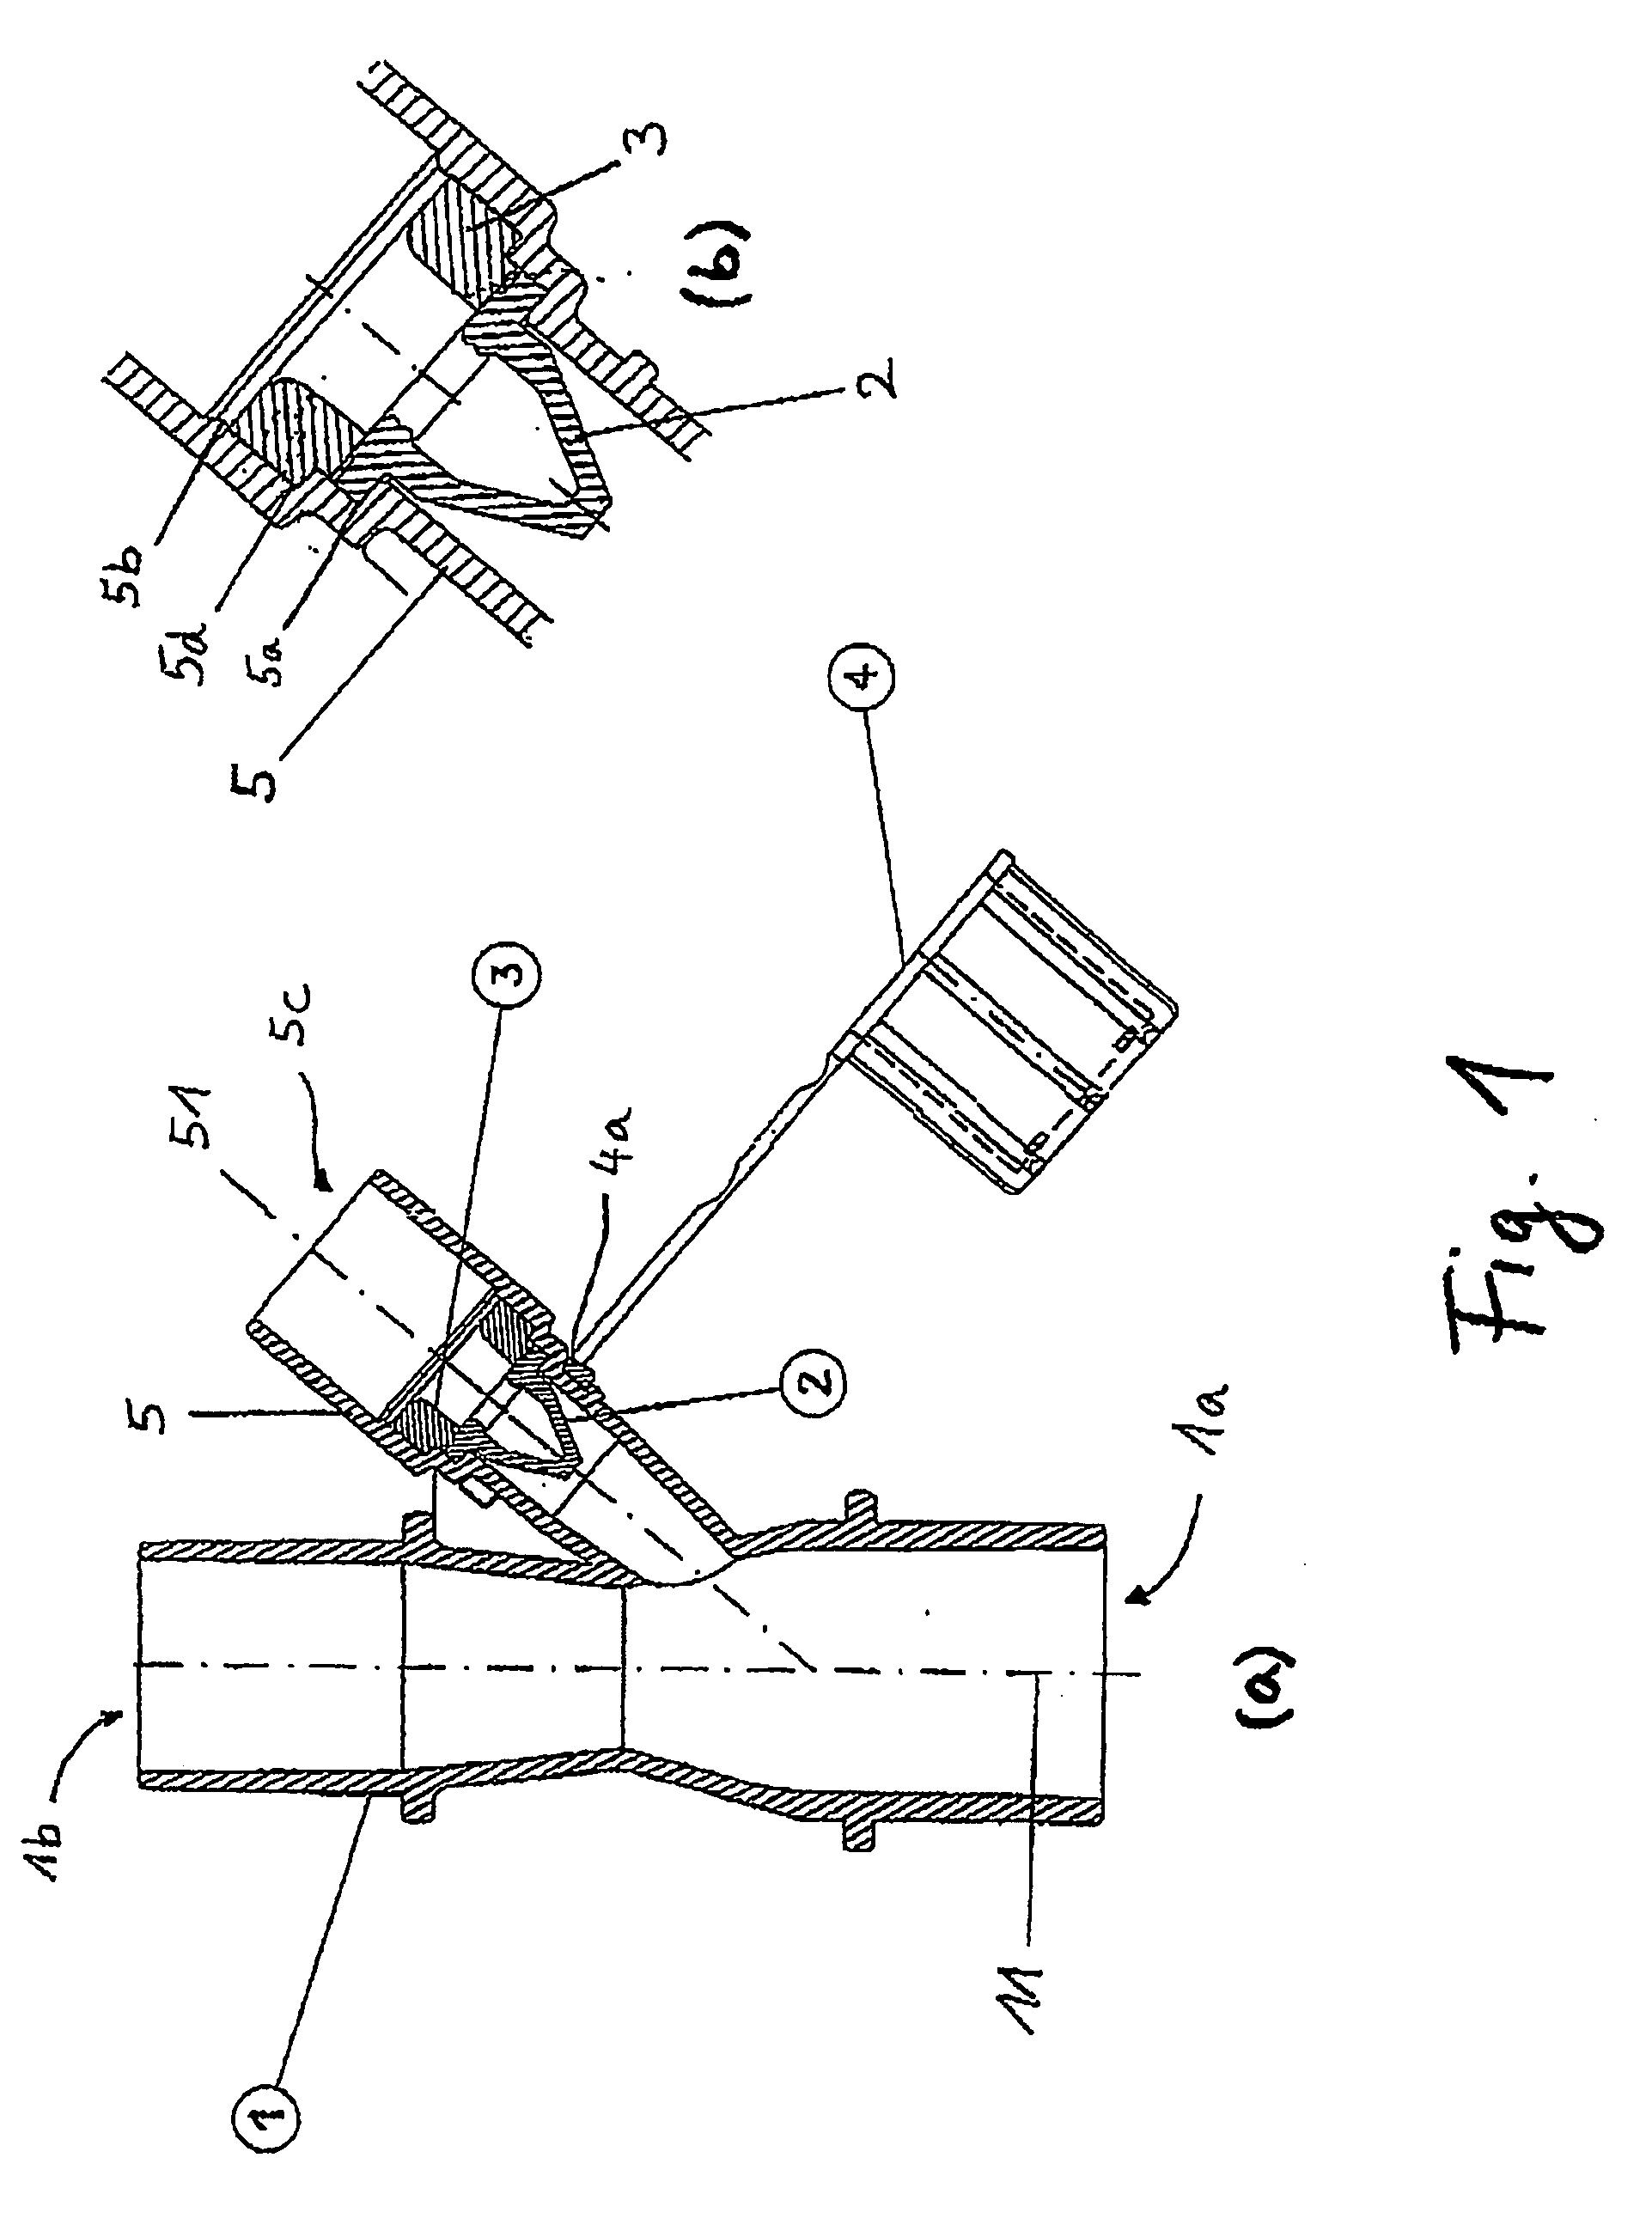 Arrangement Comprising a Catheter and Connector Piece, and Valve for Passage of a Catheter